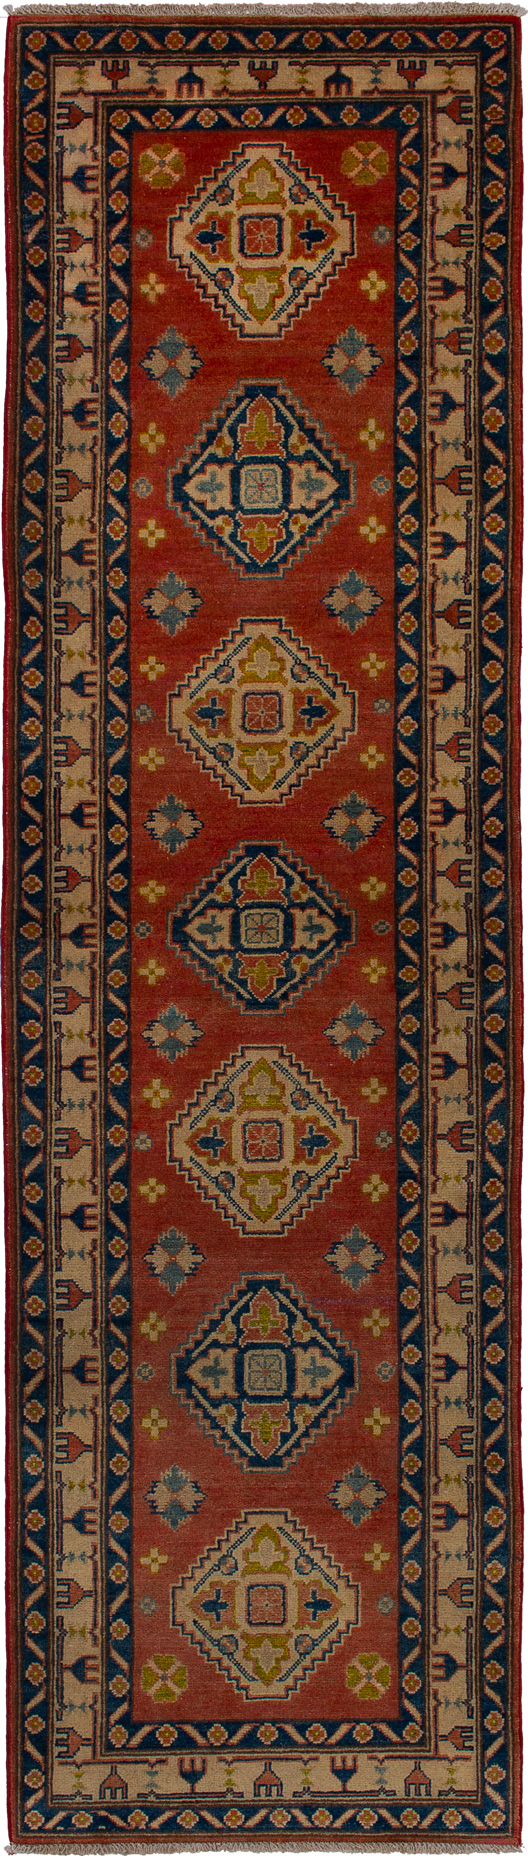 Hand-knotted Finest Gazni Copper Wool Rug 2'8" x 9'8" Size: 2'8" x 9'8"  